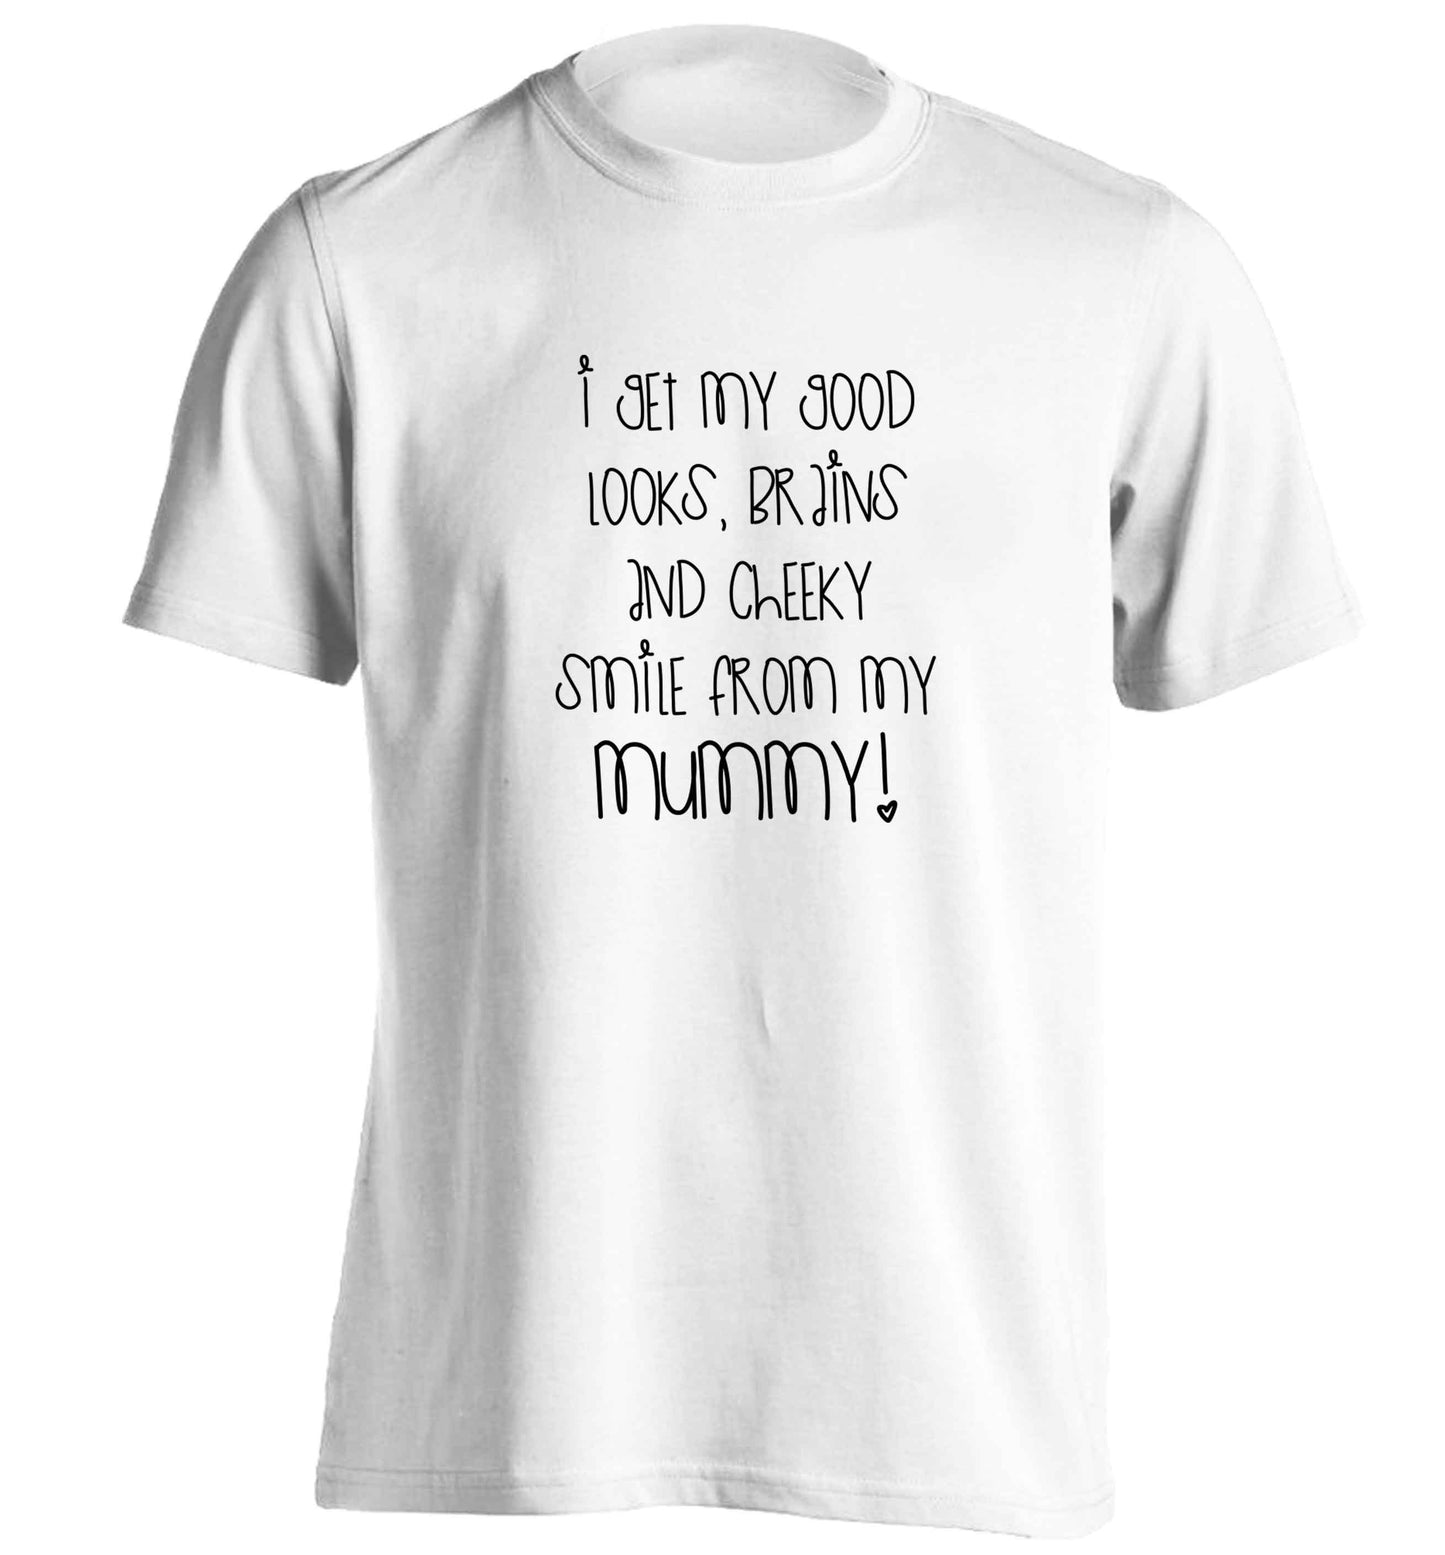 I get my good looks, brains and cheeky smile from my mummy adults unisex white Tshirt 2XL